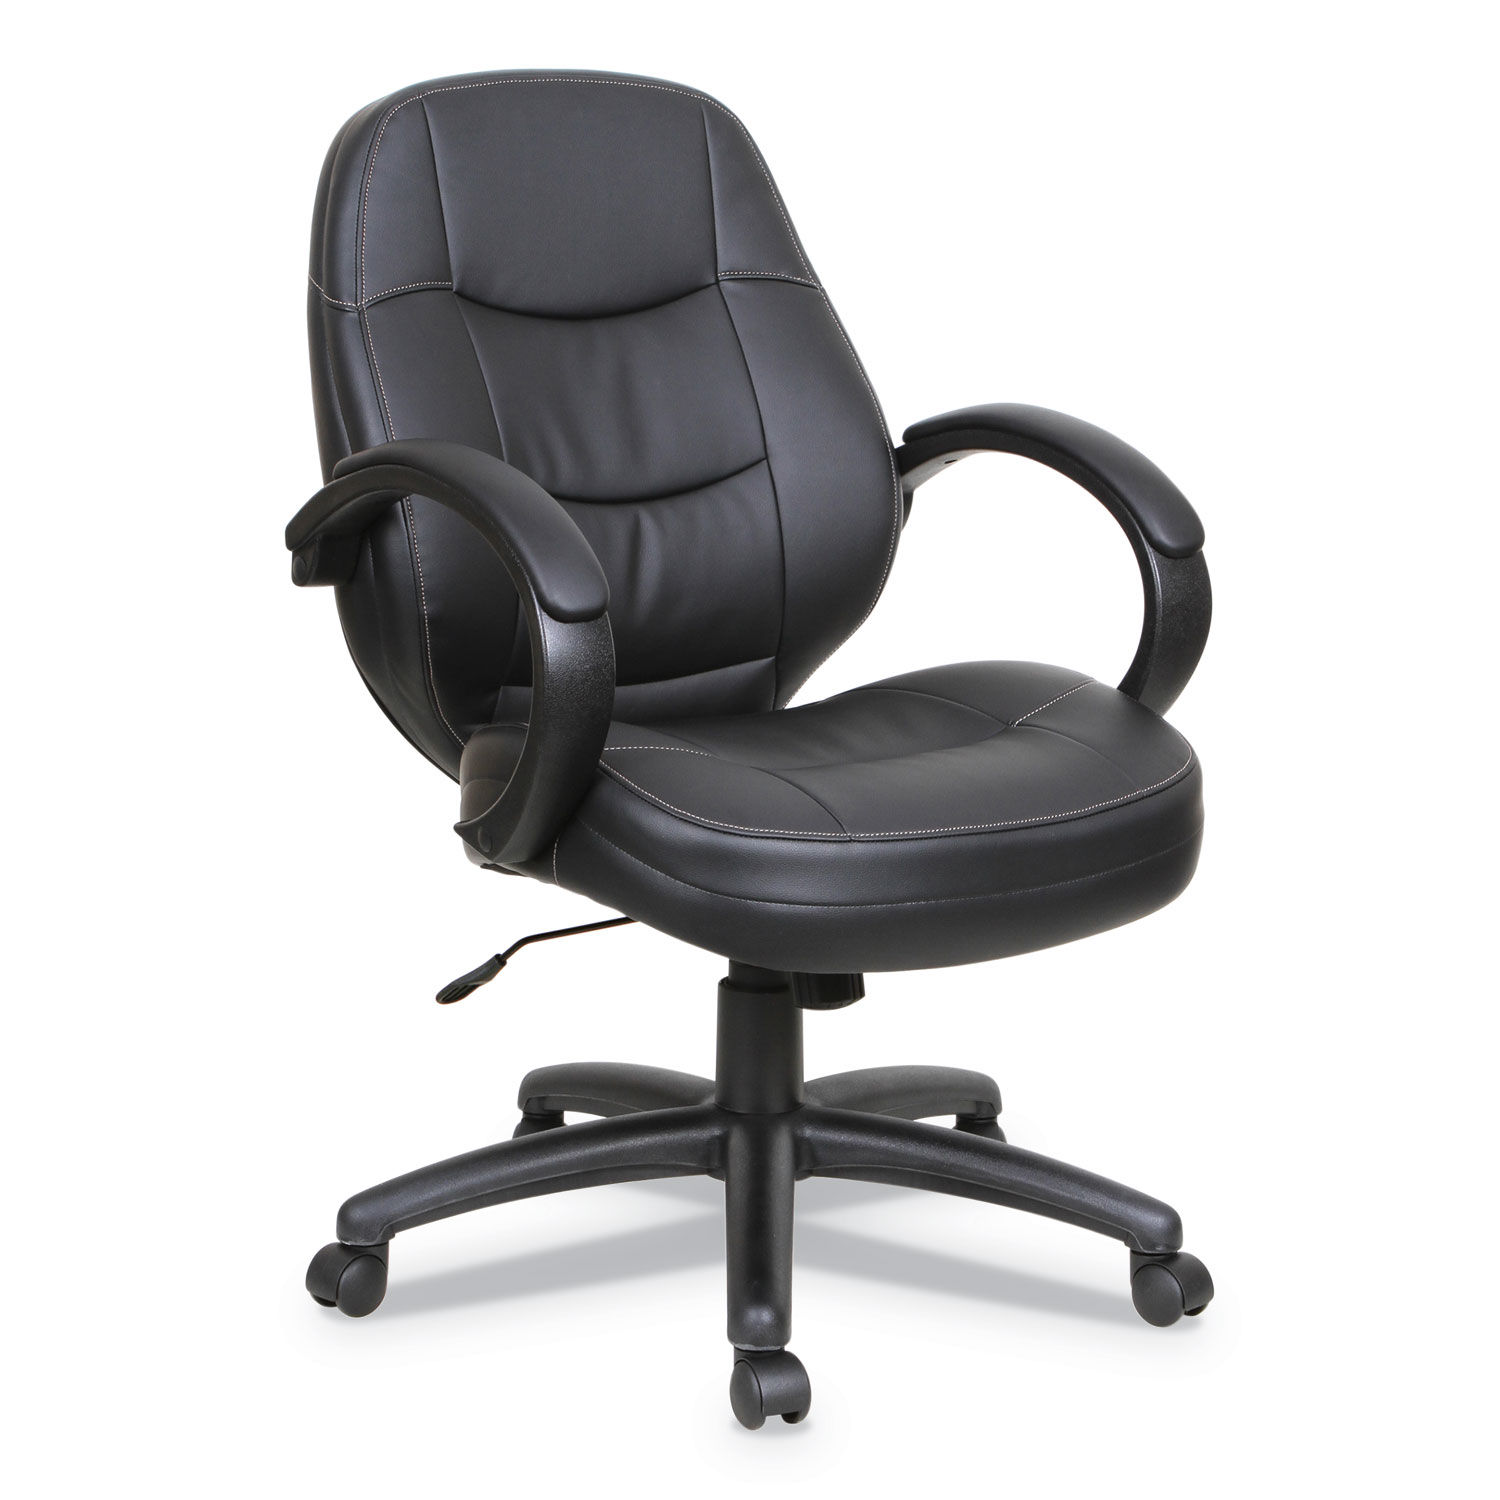 Alera PF Series Mid-Back Bonded Leather Office Chair Supports Up to 275 lb, 18.11" to 21.45" Seat Height, Black